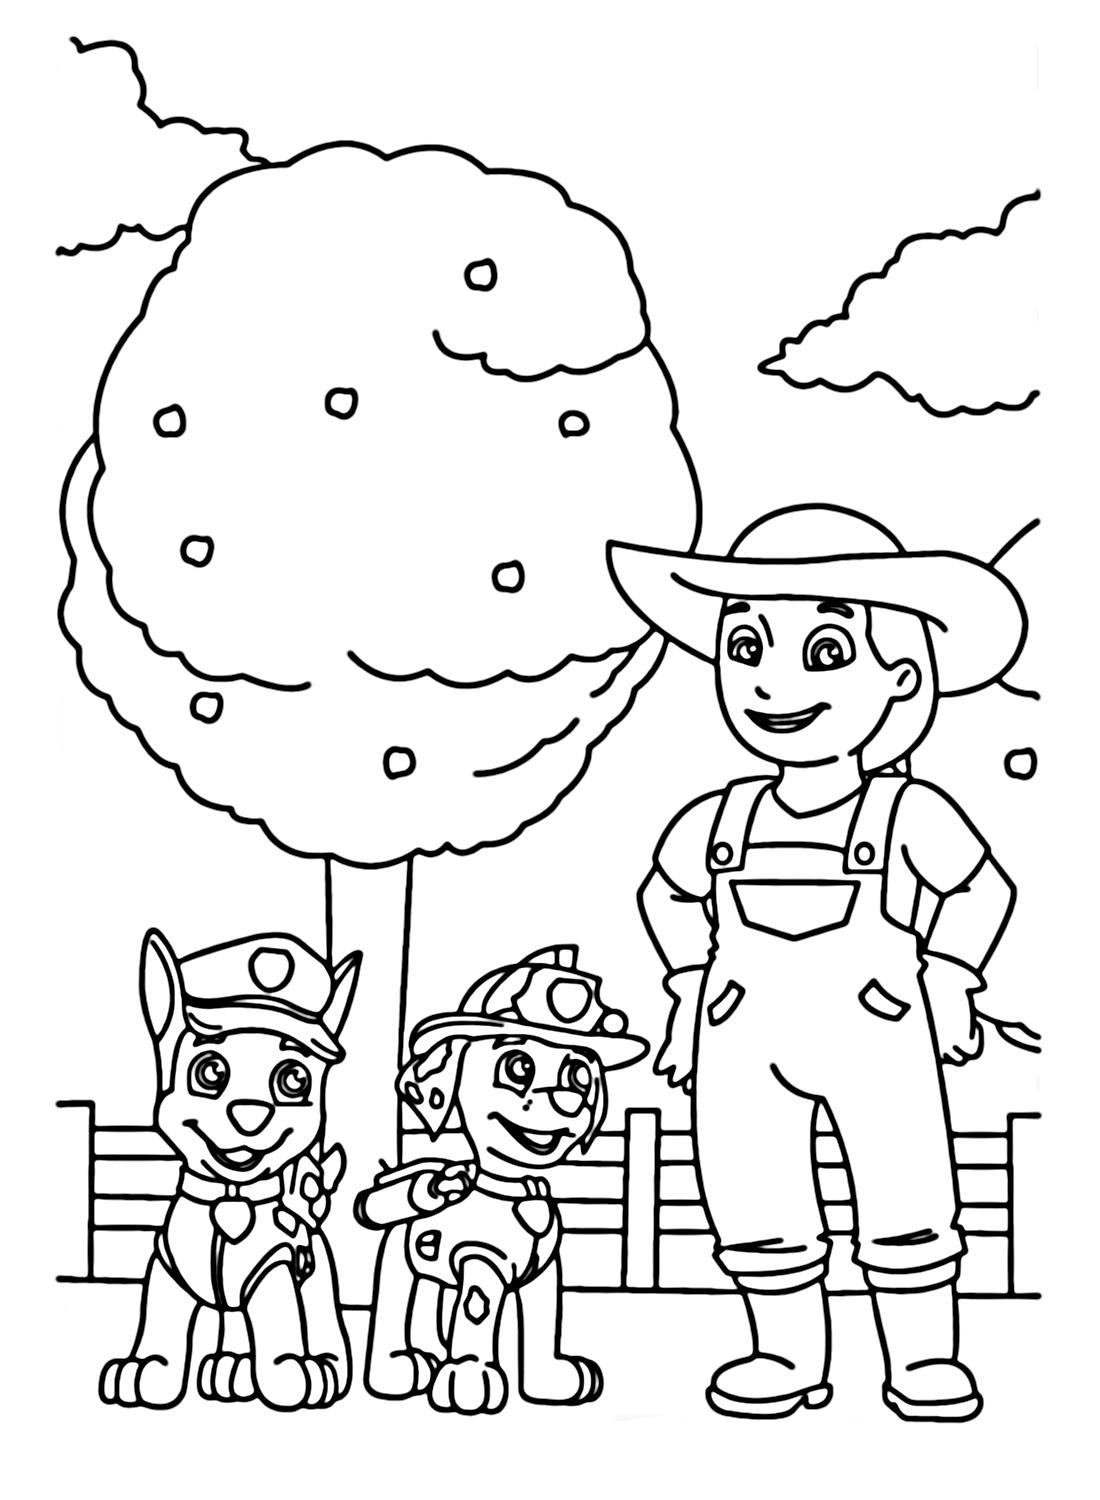 Paw Patrol Characters 7 Coloring Pages